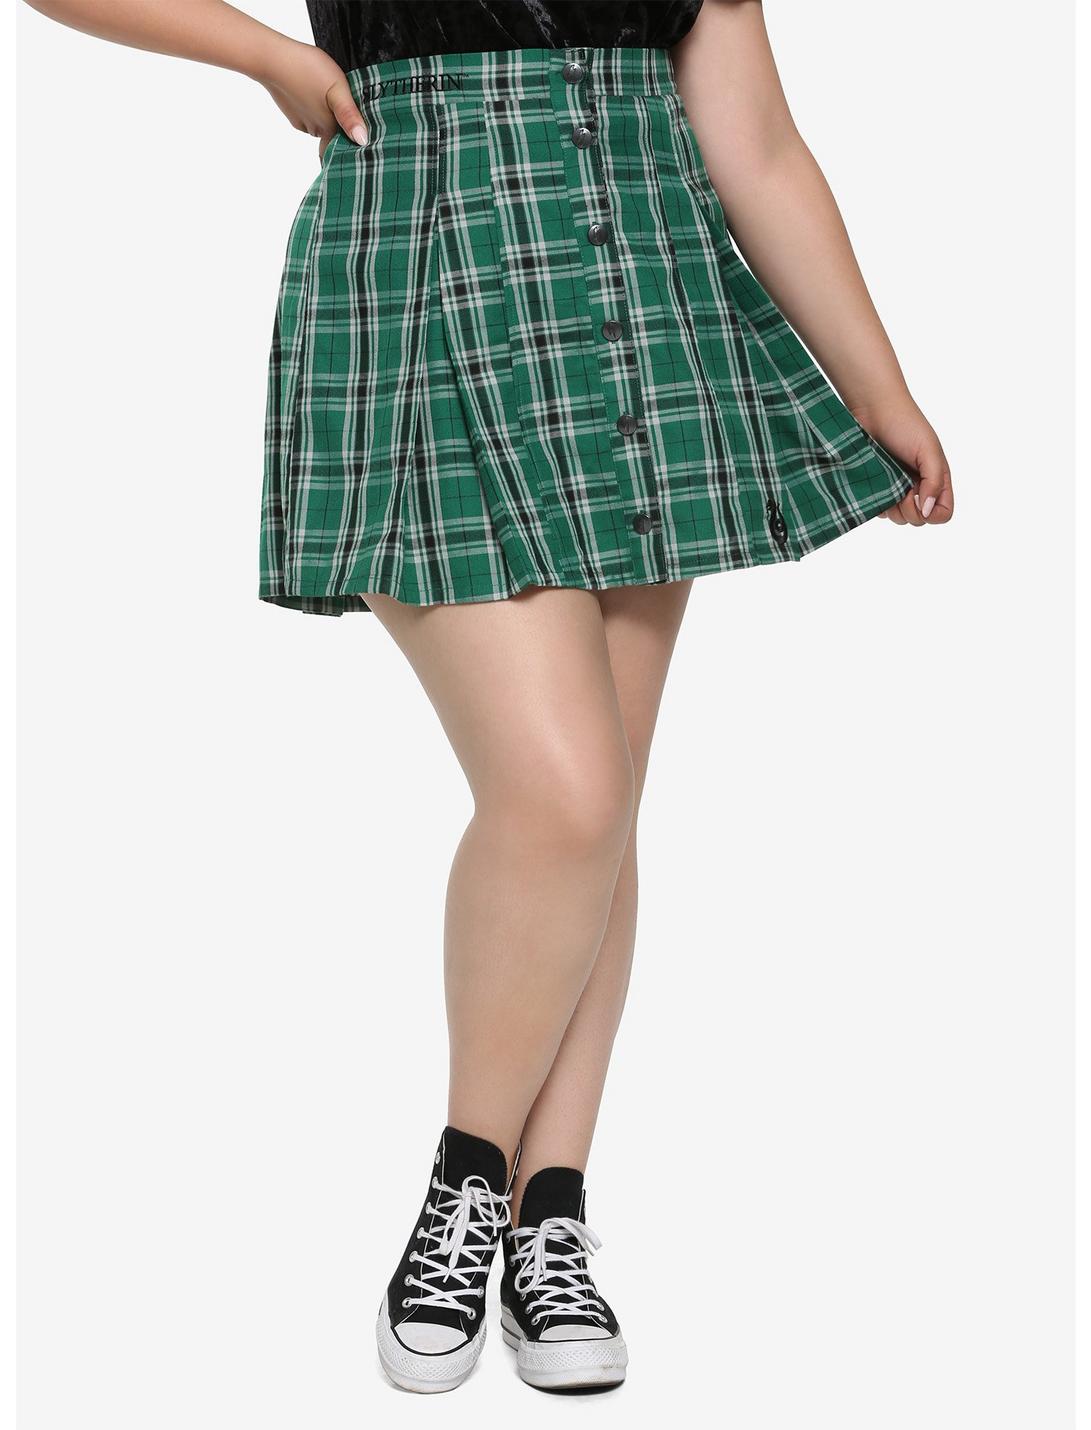 Harry Potter Slytherin Pleated Plaid Skirt Plus Size, PLAID - GREEN, hi-res